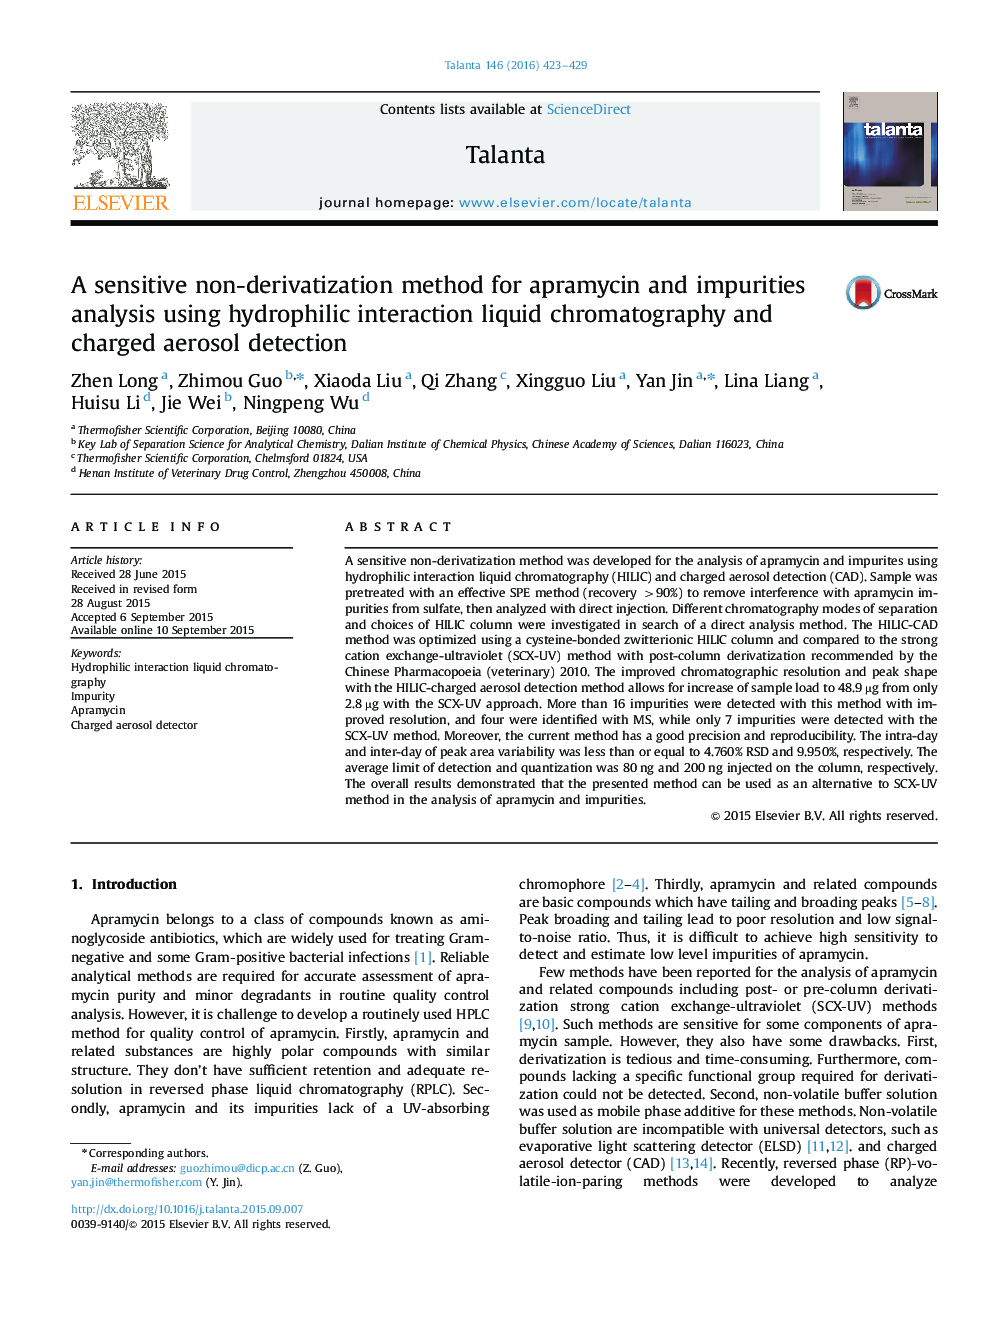 A sensitive non-derivatization method for apramycin and impurities analysis using hydrophilic interaction liquid chromatography and charged aerosol detection